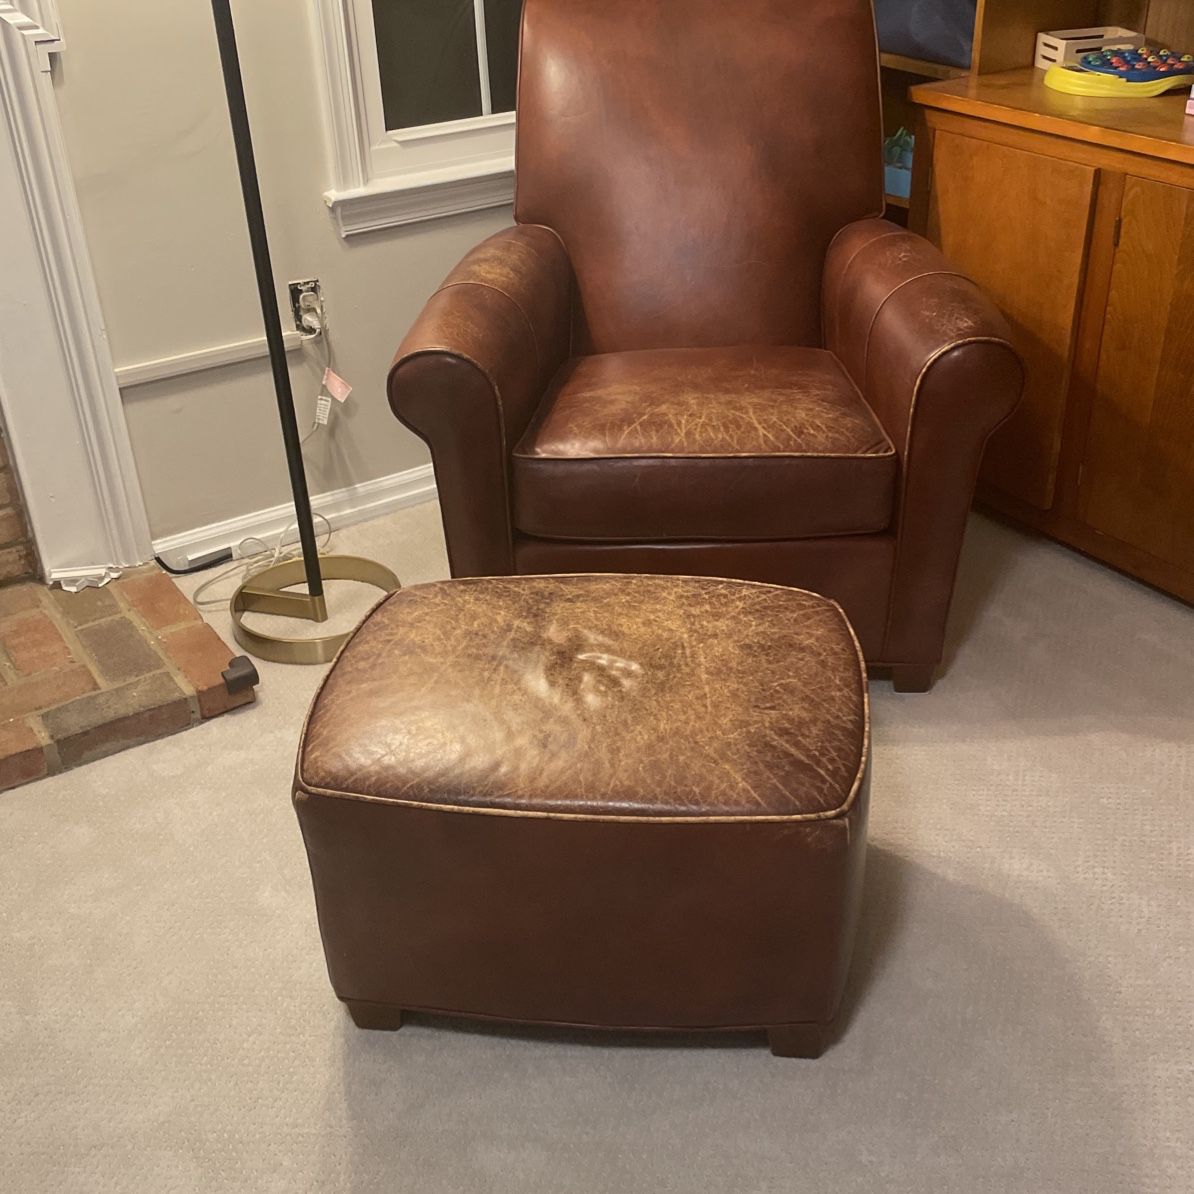 Ethan Allen Leather Chair